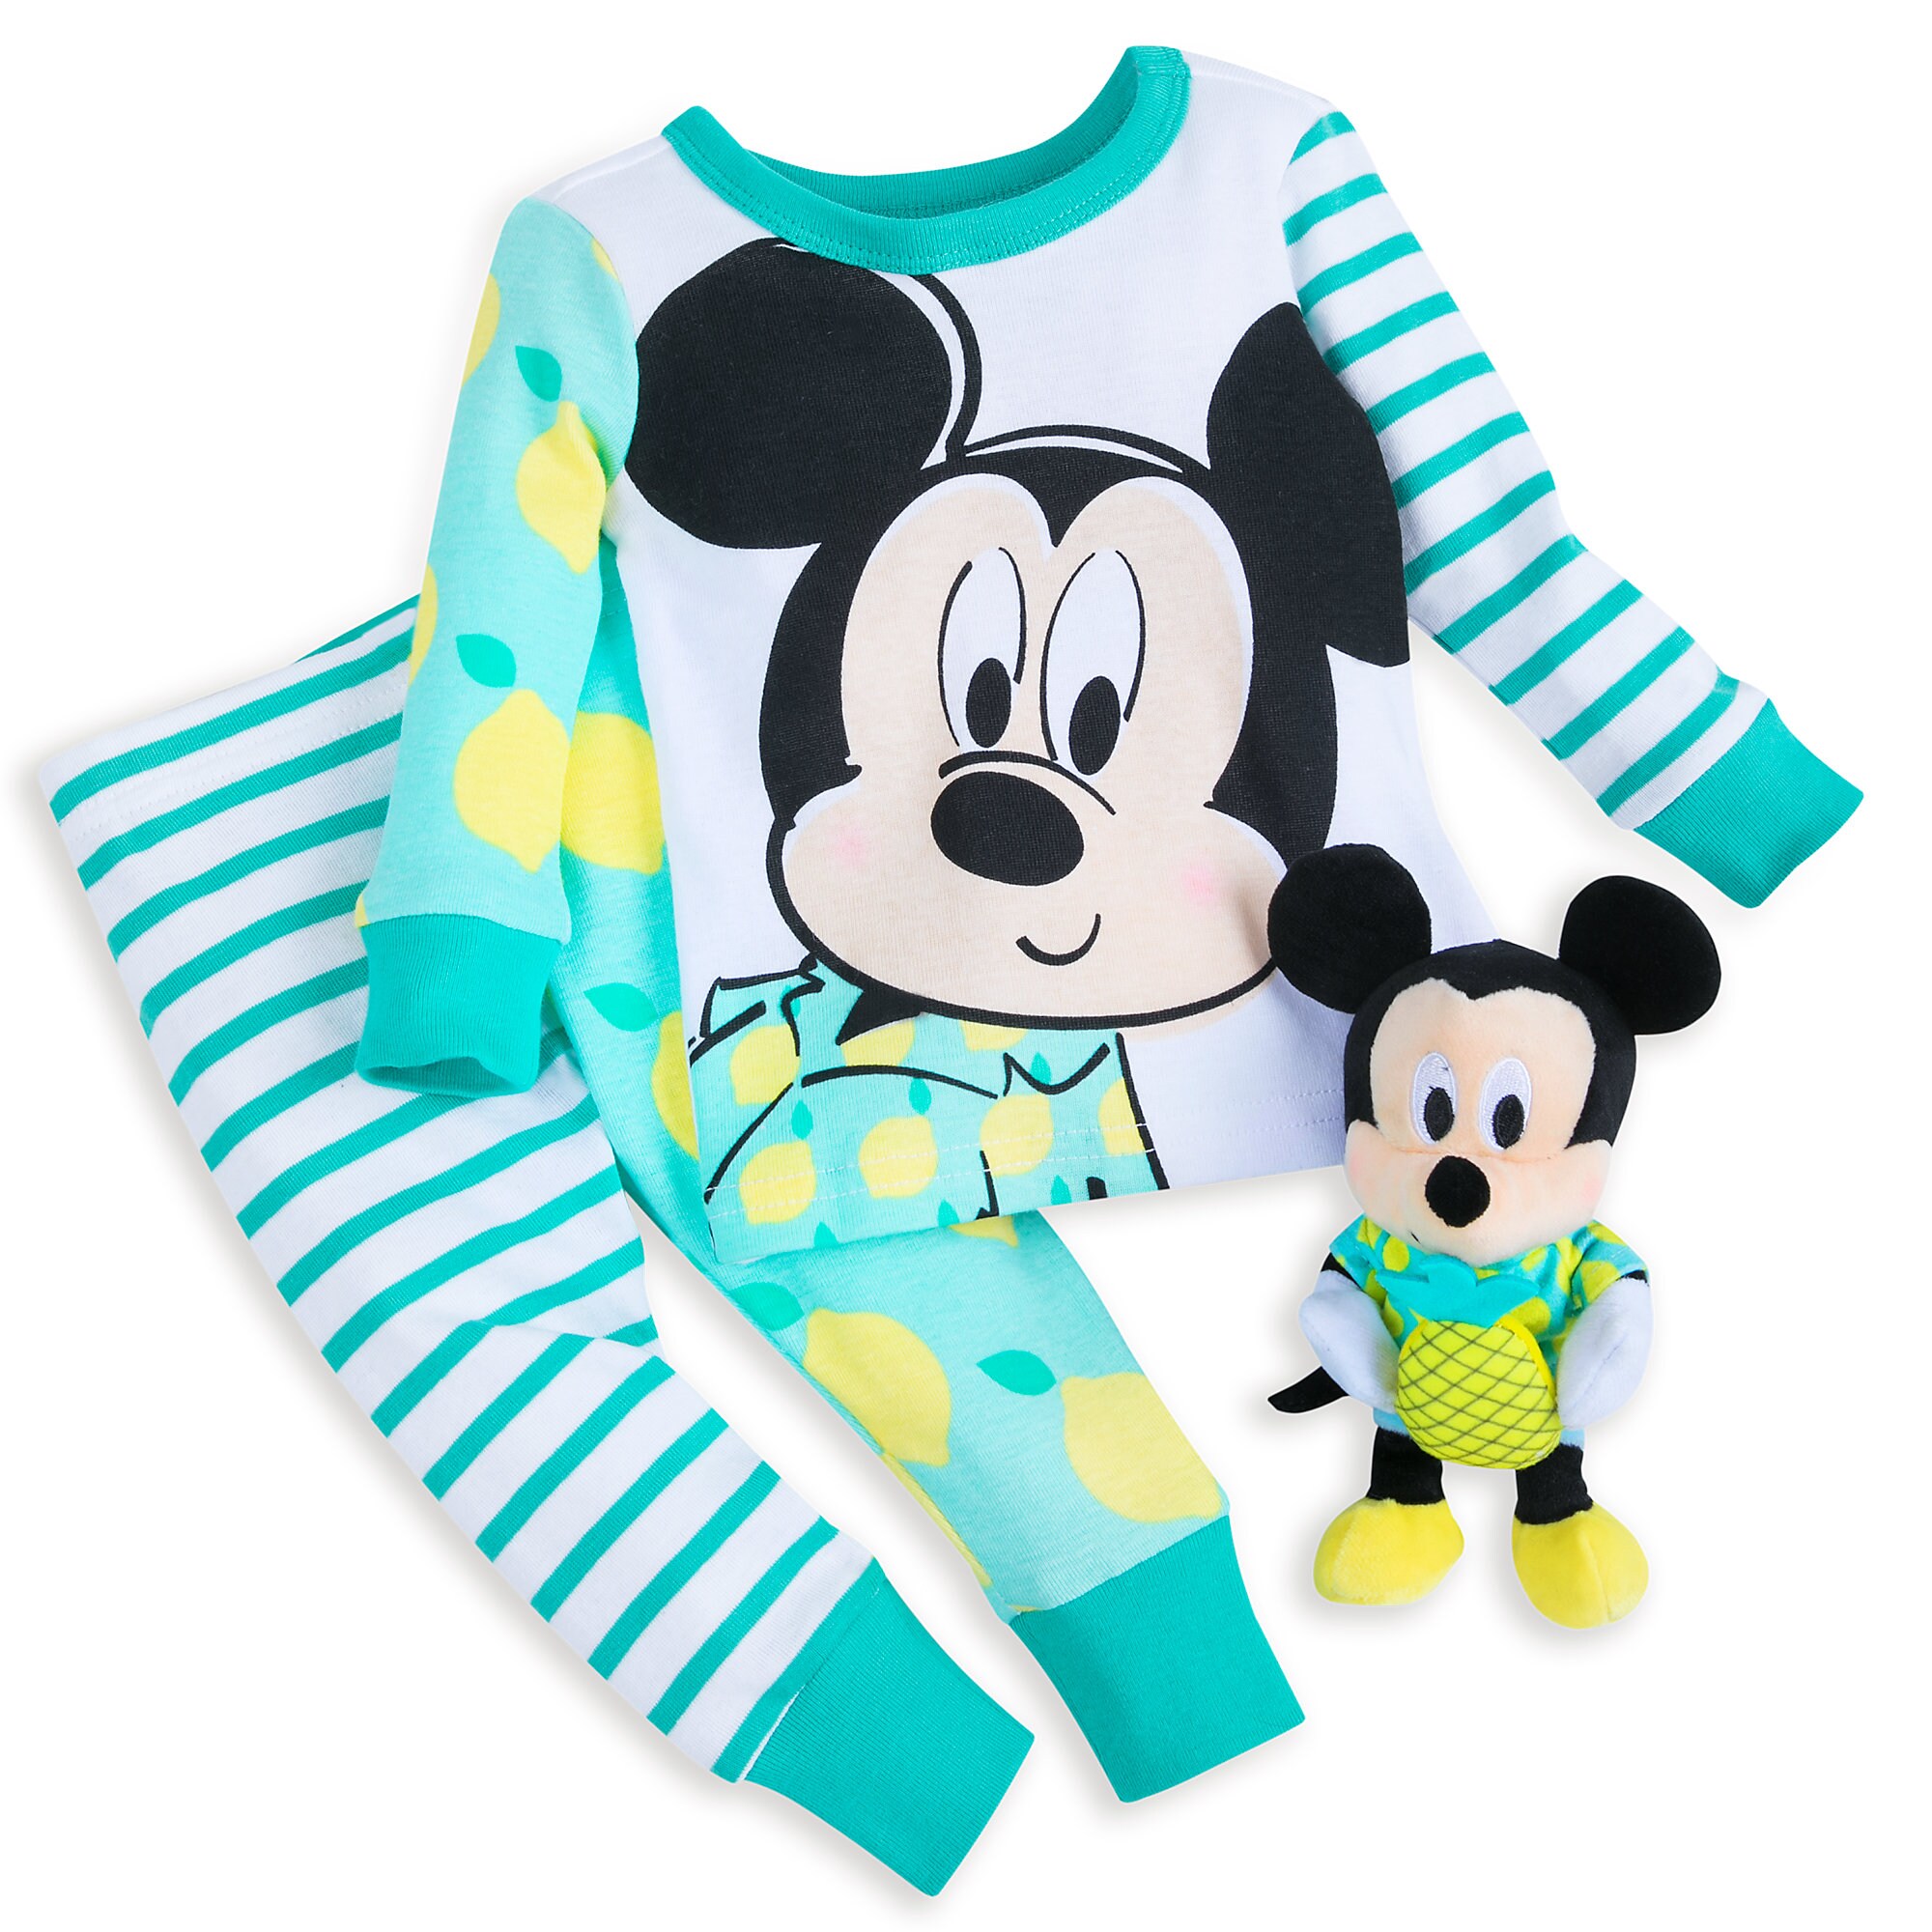 Mickey Mouse PJ PALS and Plush Rattle Set for Baby